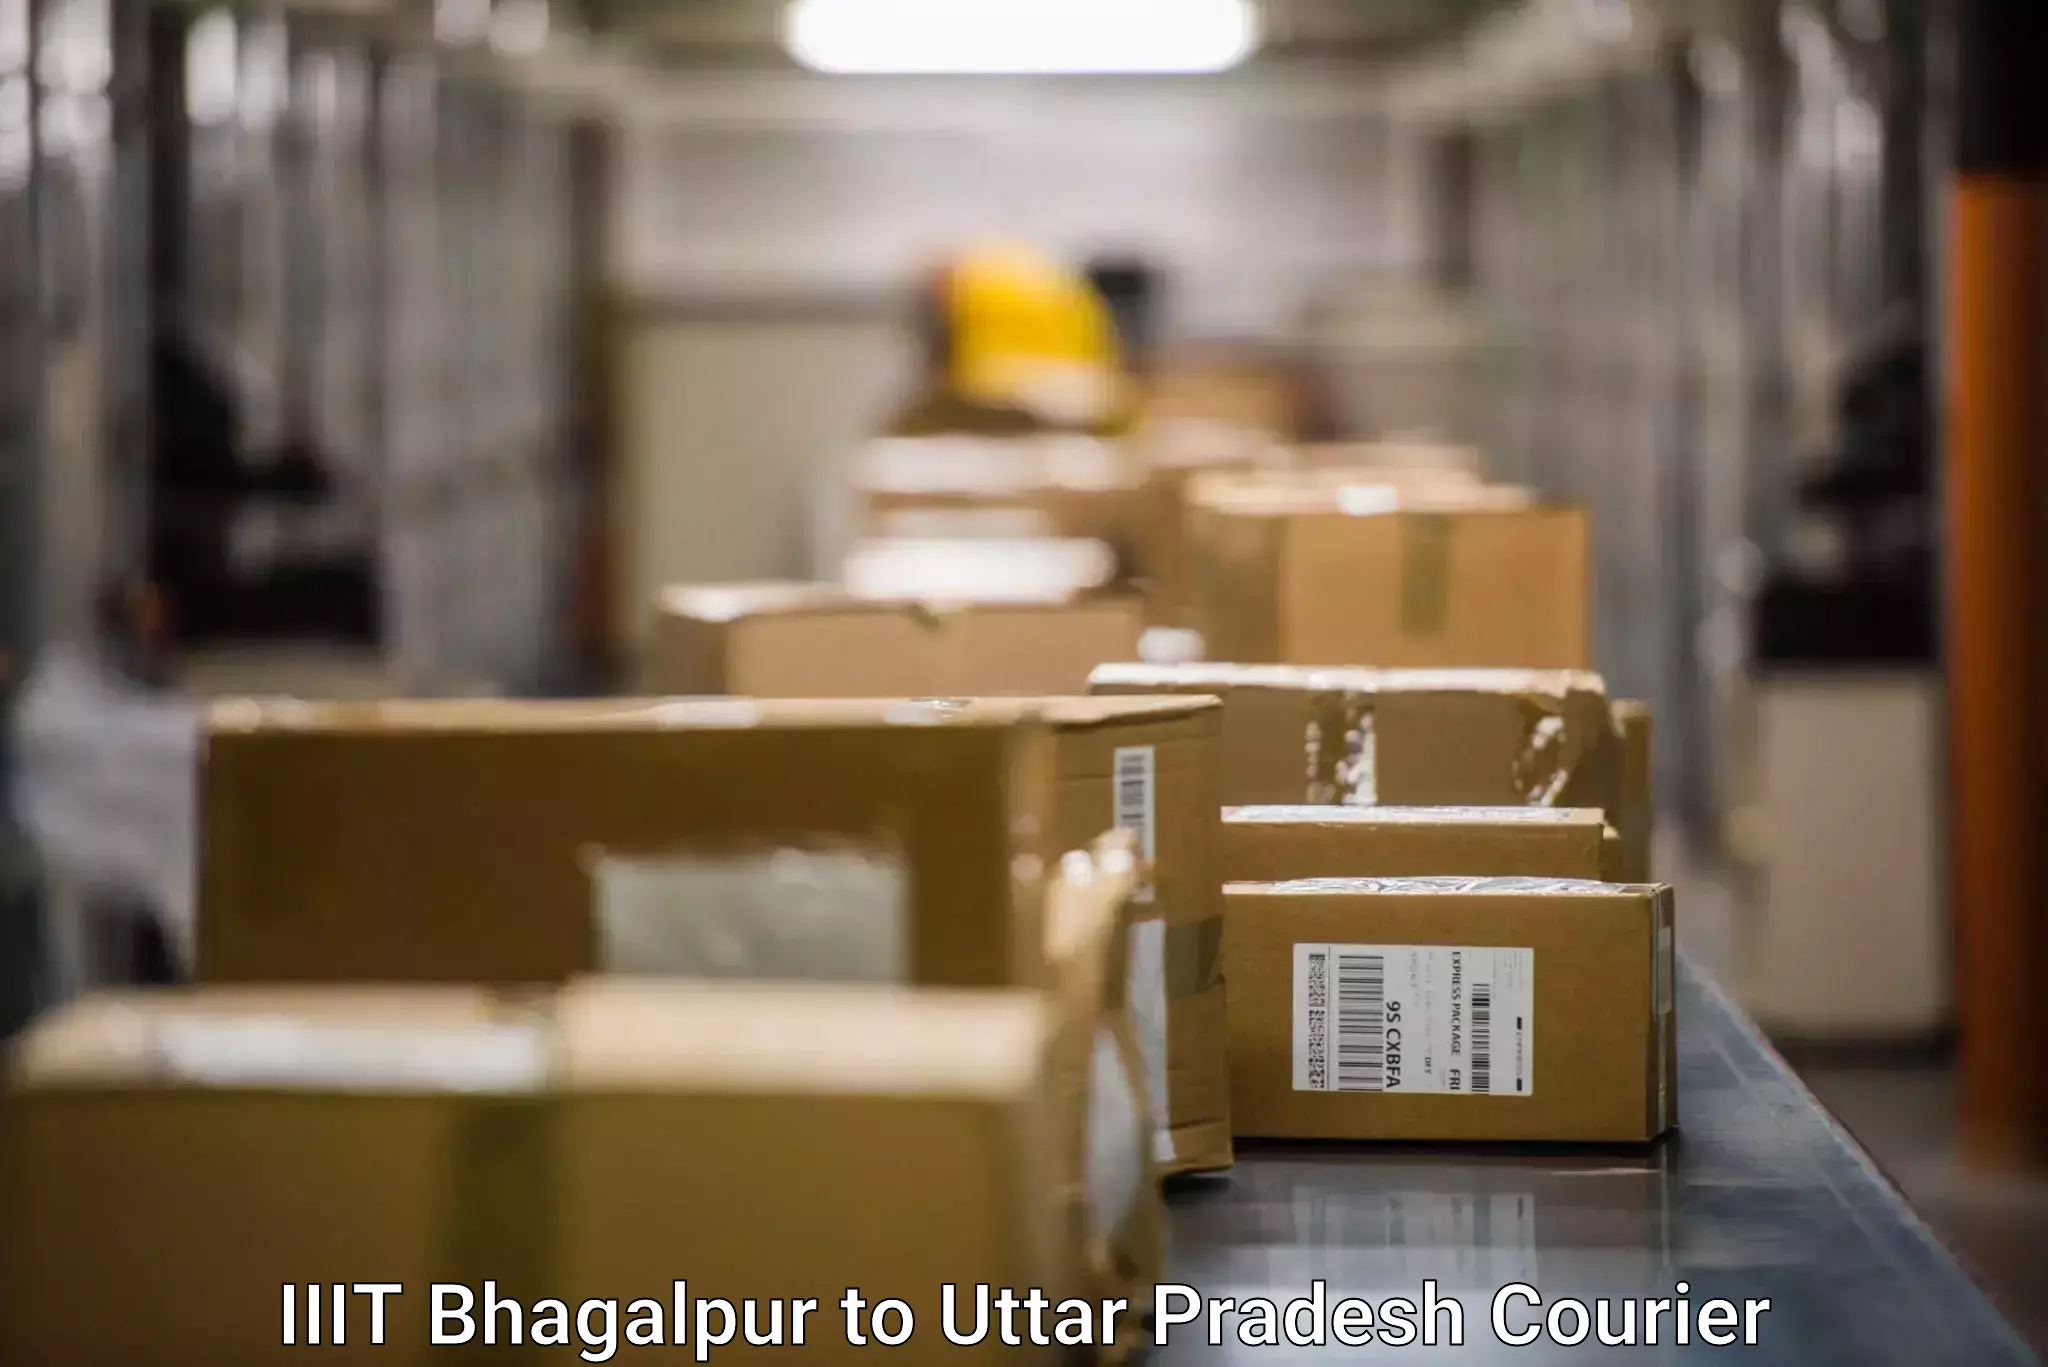 Same-day delivery solutions IIIT Bhagalpur to Banda